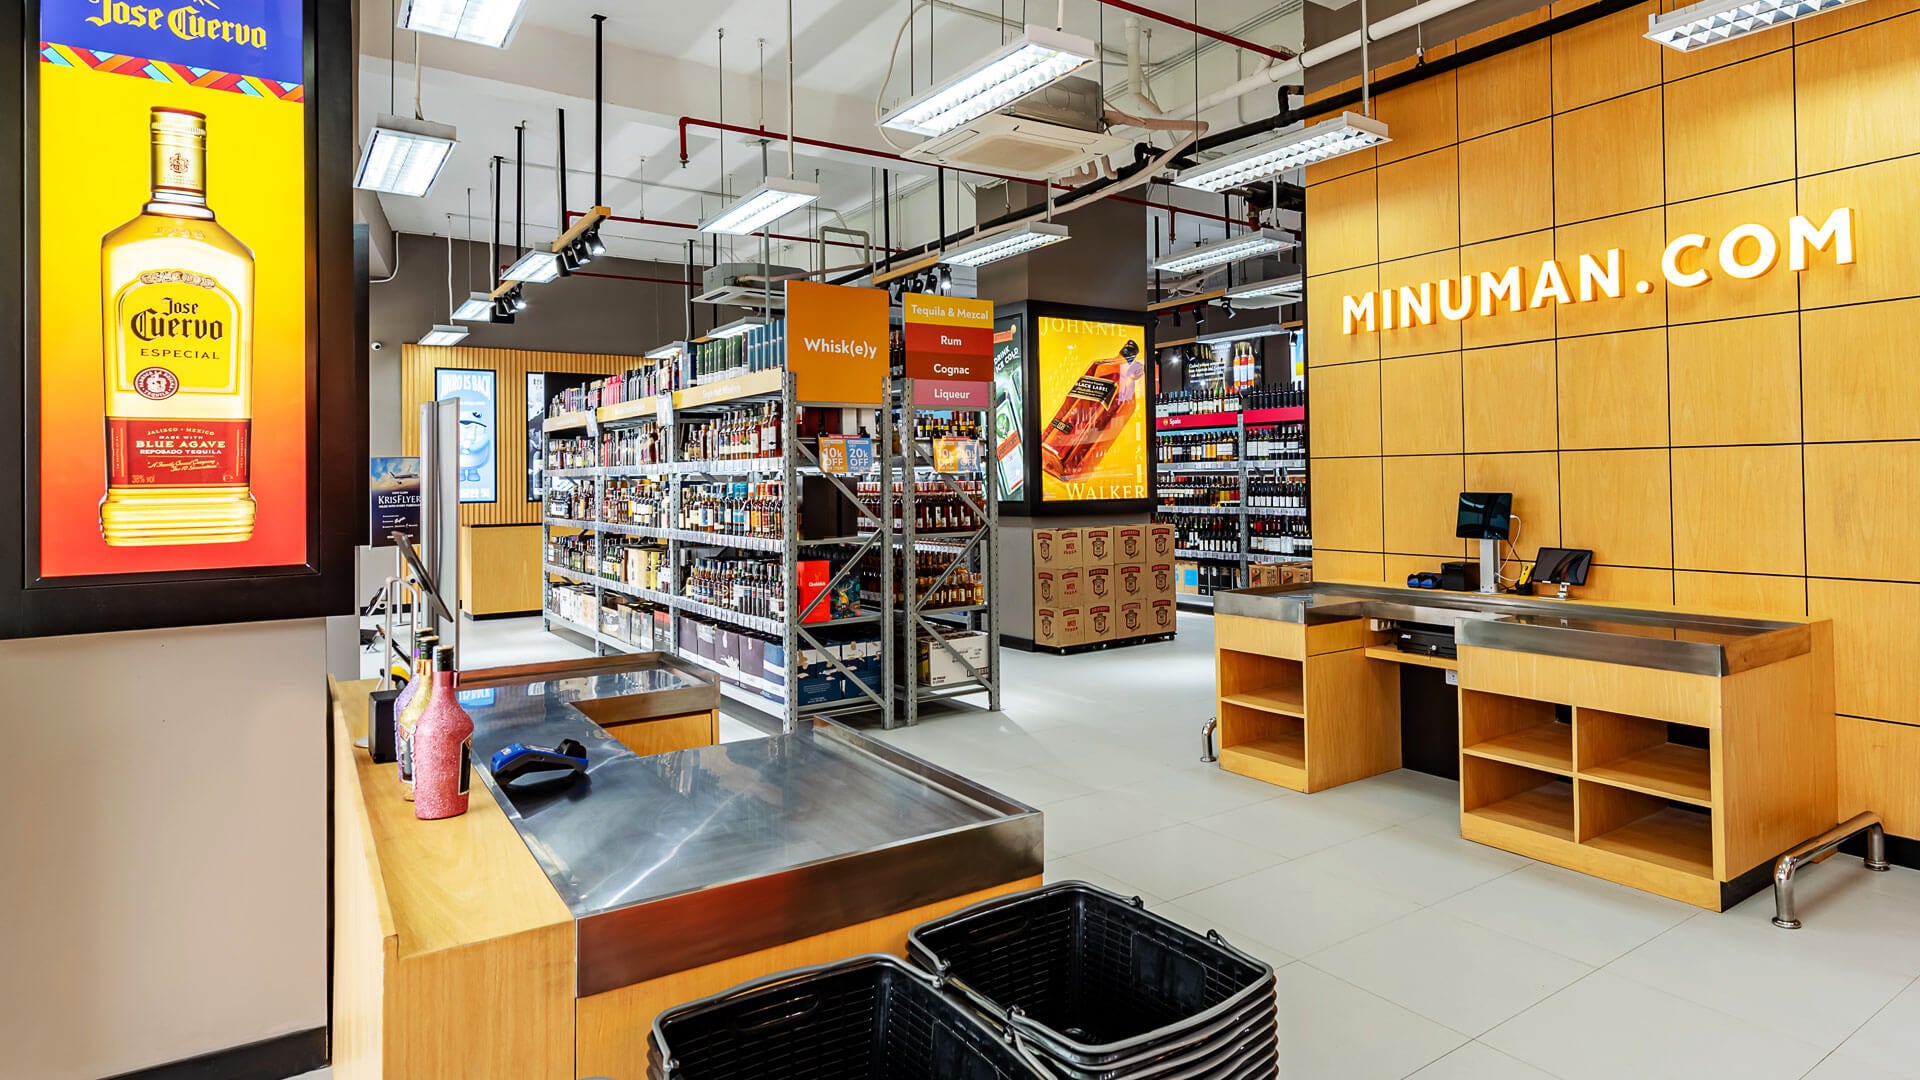 We're Open! Minuman.com’s brand new superstore is your go-to spot for all things booze